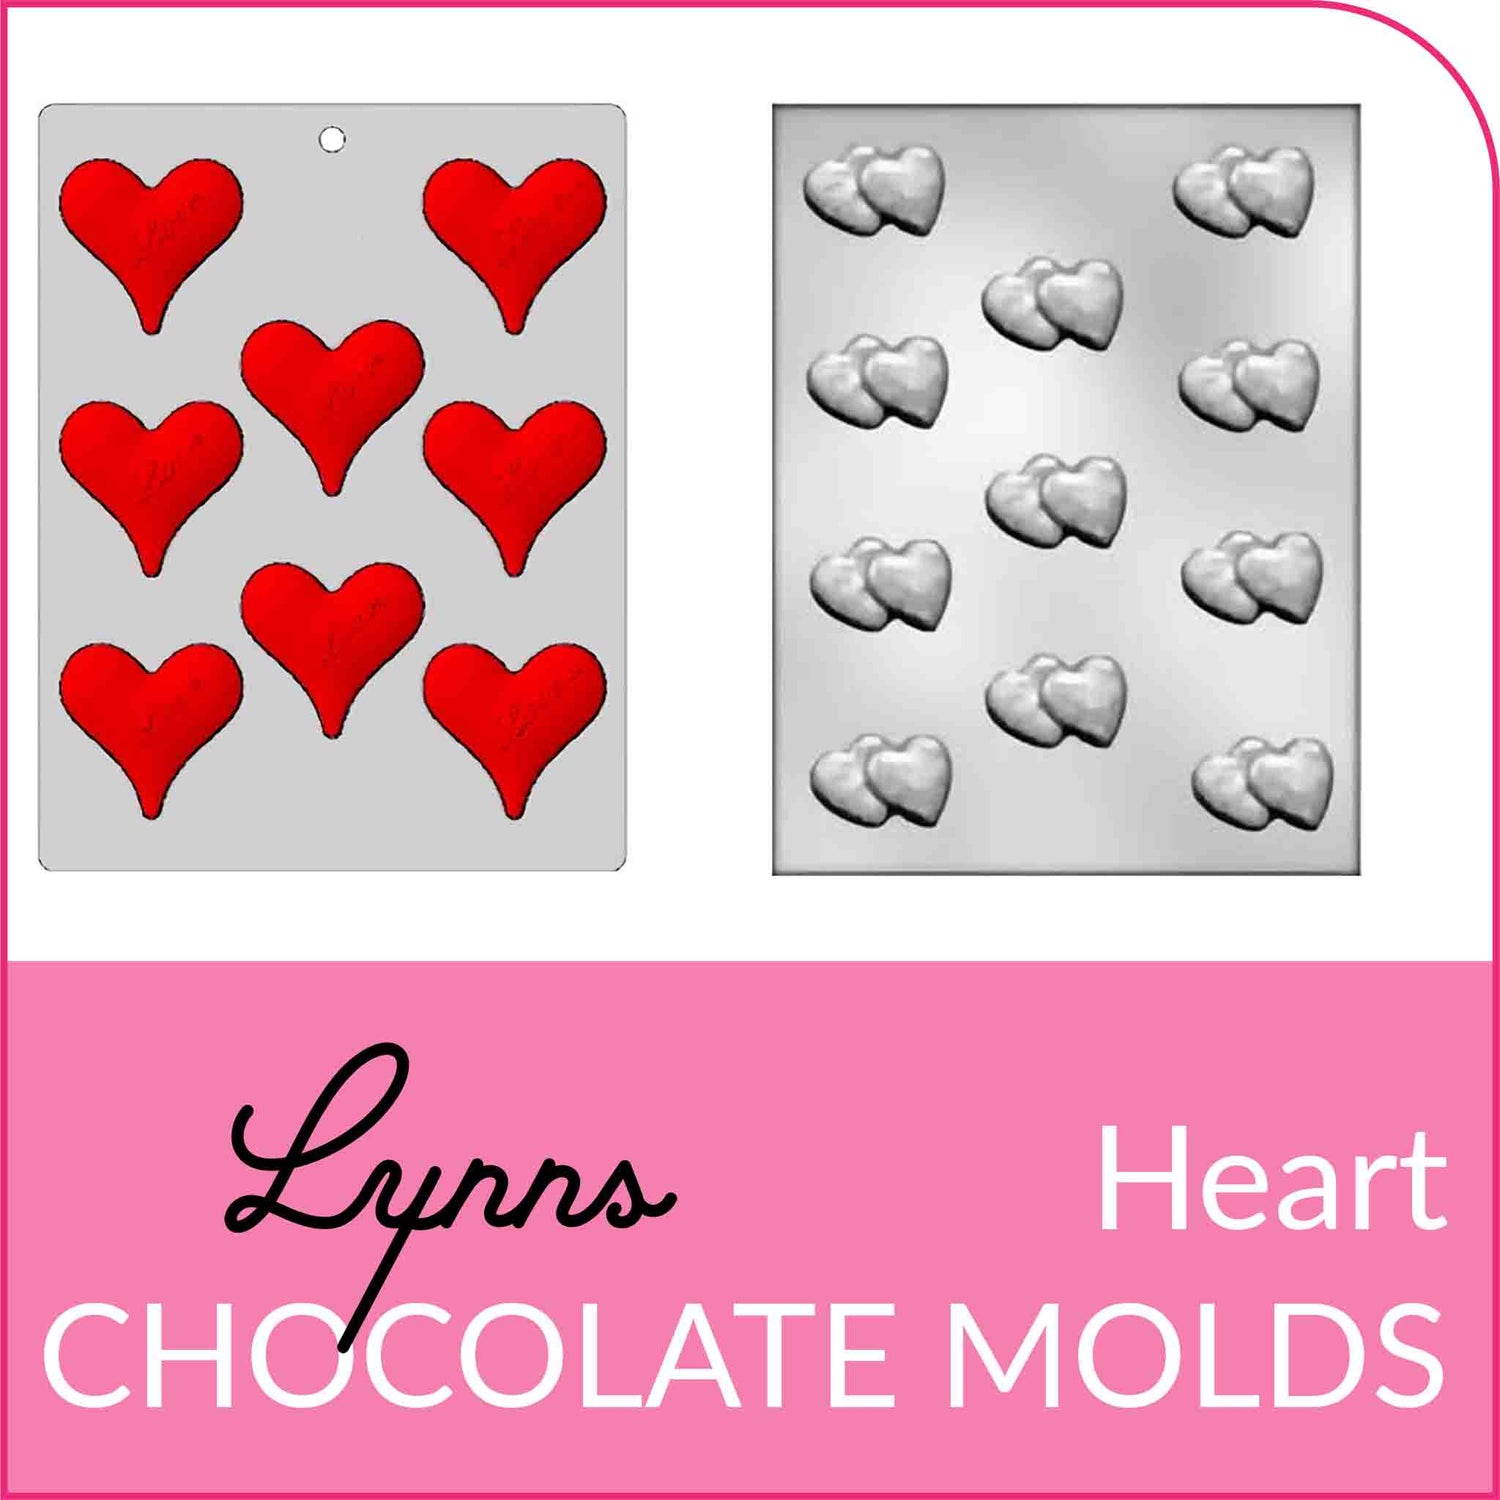 Shop Heart Shaped Chocolate Molds from Lynn's